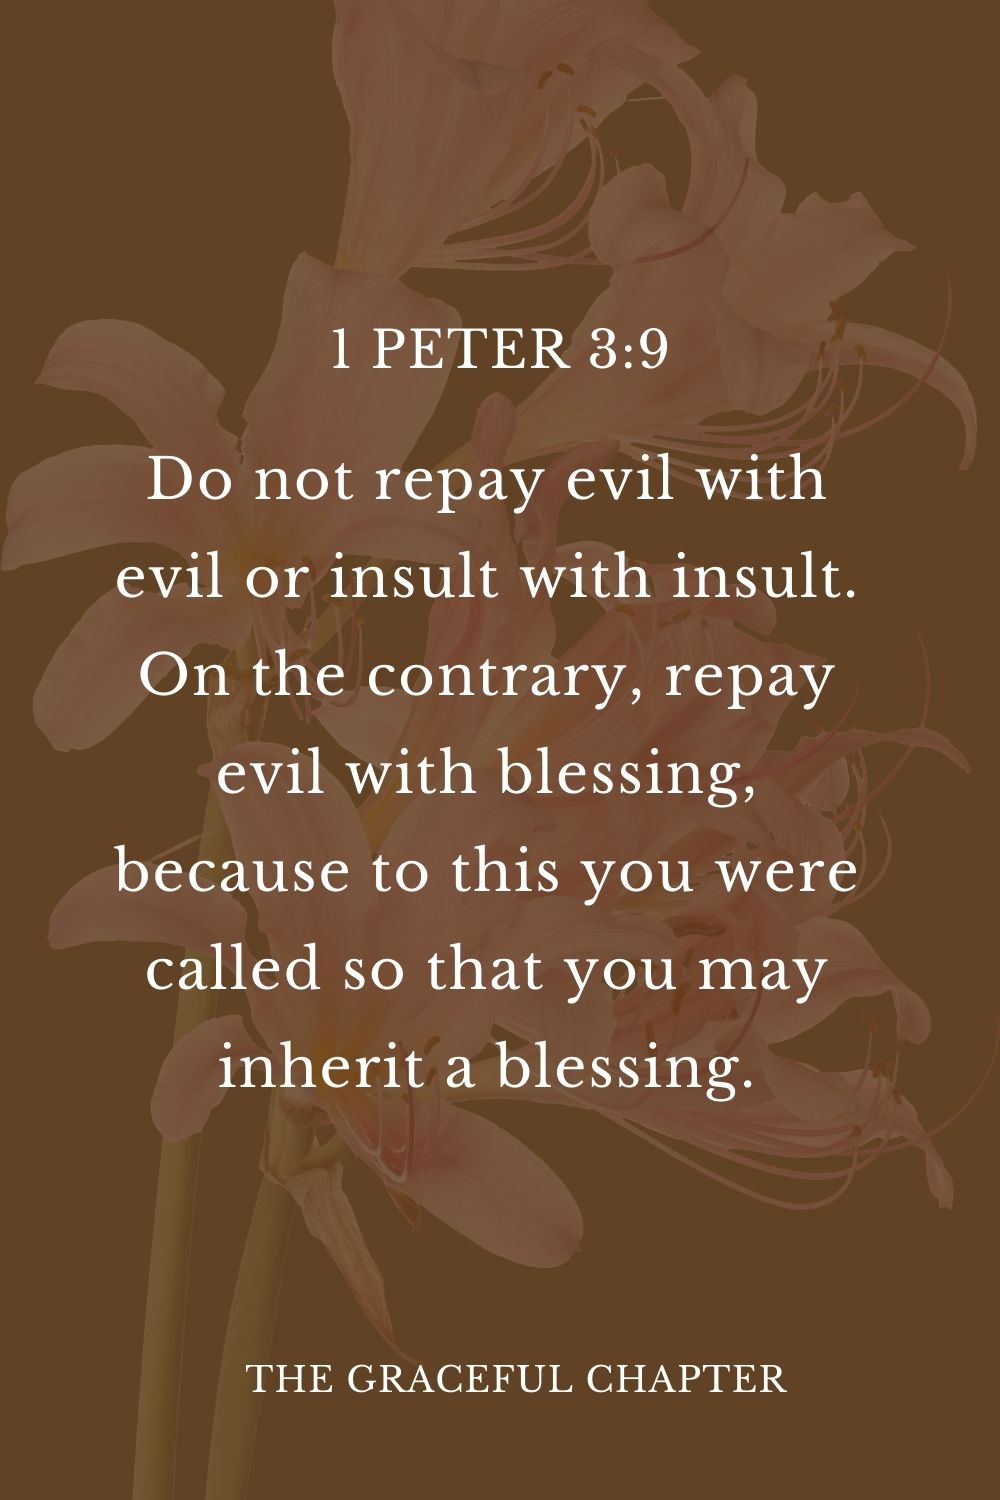 Do not repay evil with evil or insult with insult. On the contrary, repay evil with blessing, because to this you were called so that you may inherit a blessing. 1 Peter 3:9